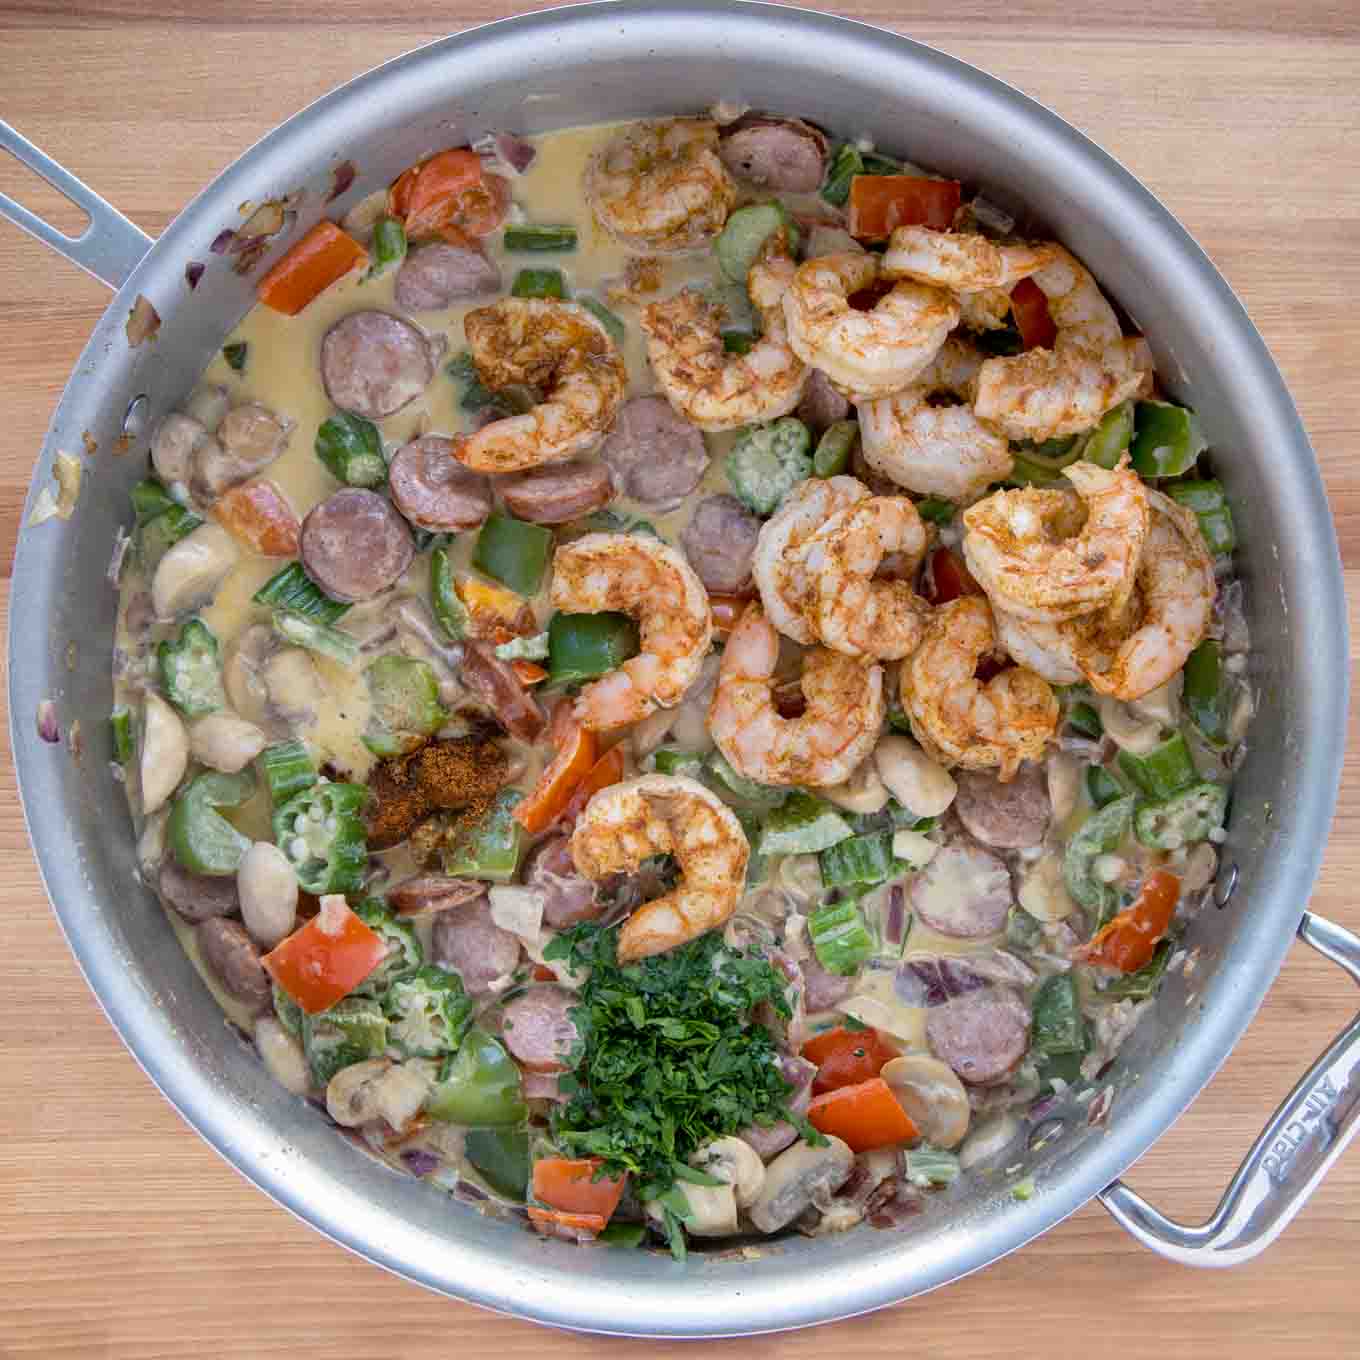 shrimp added back into skillet with the rest of the cooked ingredients